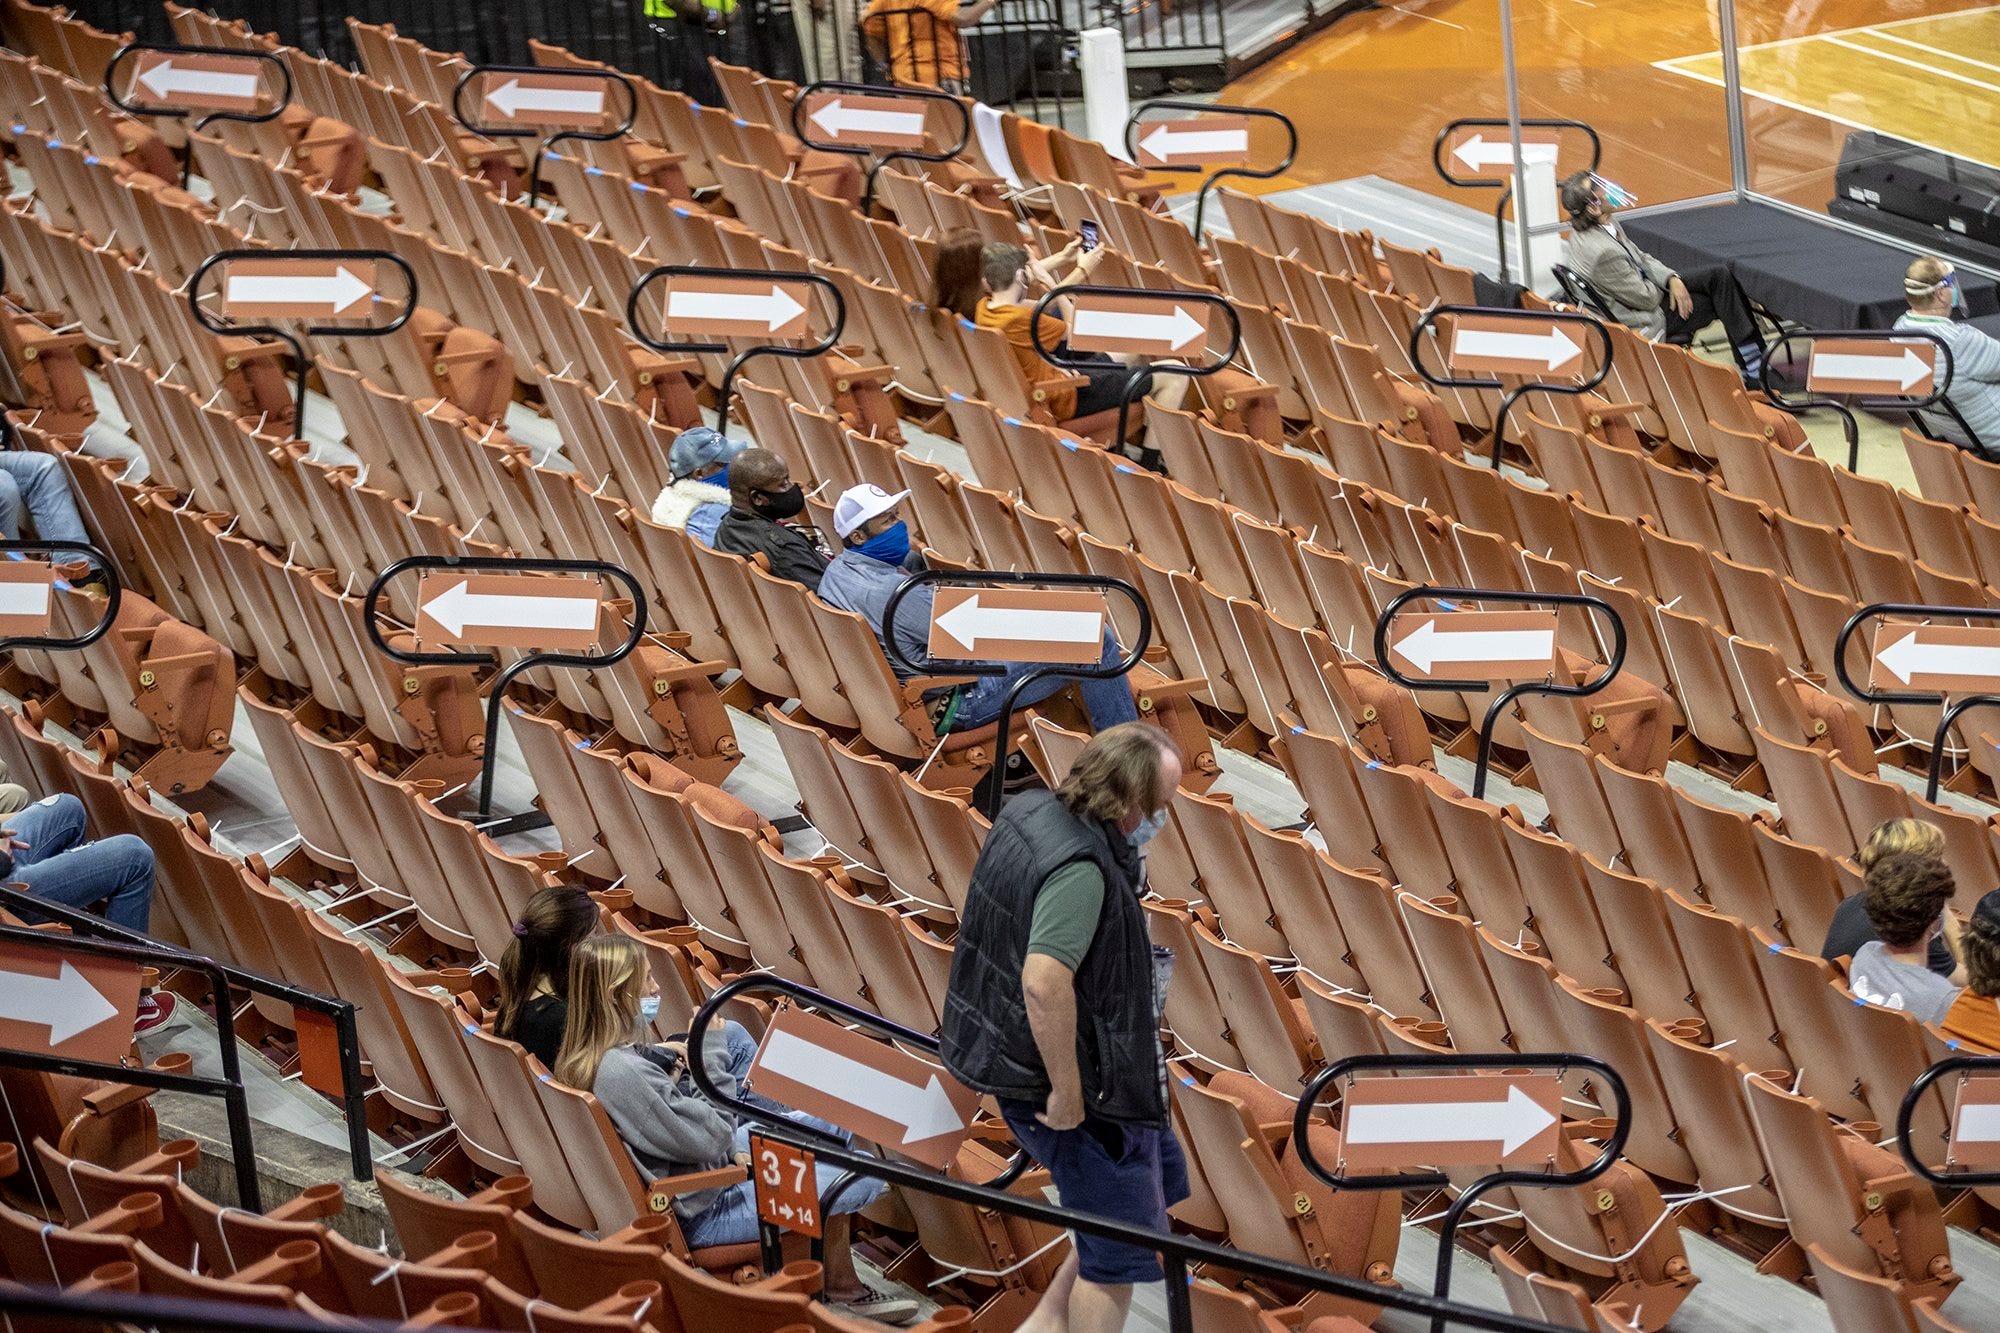 Texas Longhorns fans make their way to their seat to watch Texas Longhorns against University of Texas Rio Grande Valley of a NCAA basketball game at the Frank Erwin Center, Wednesday November 25, 2020.